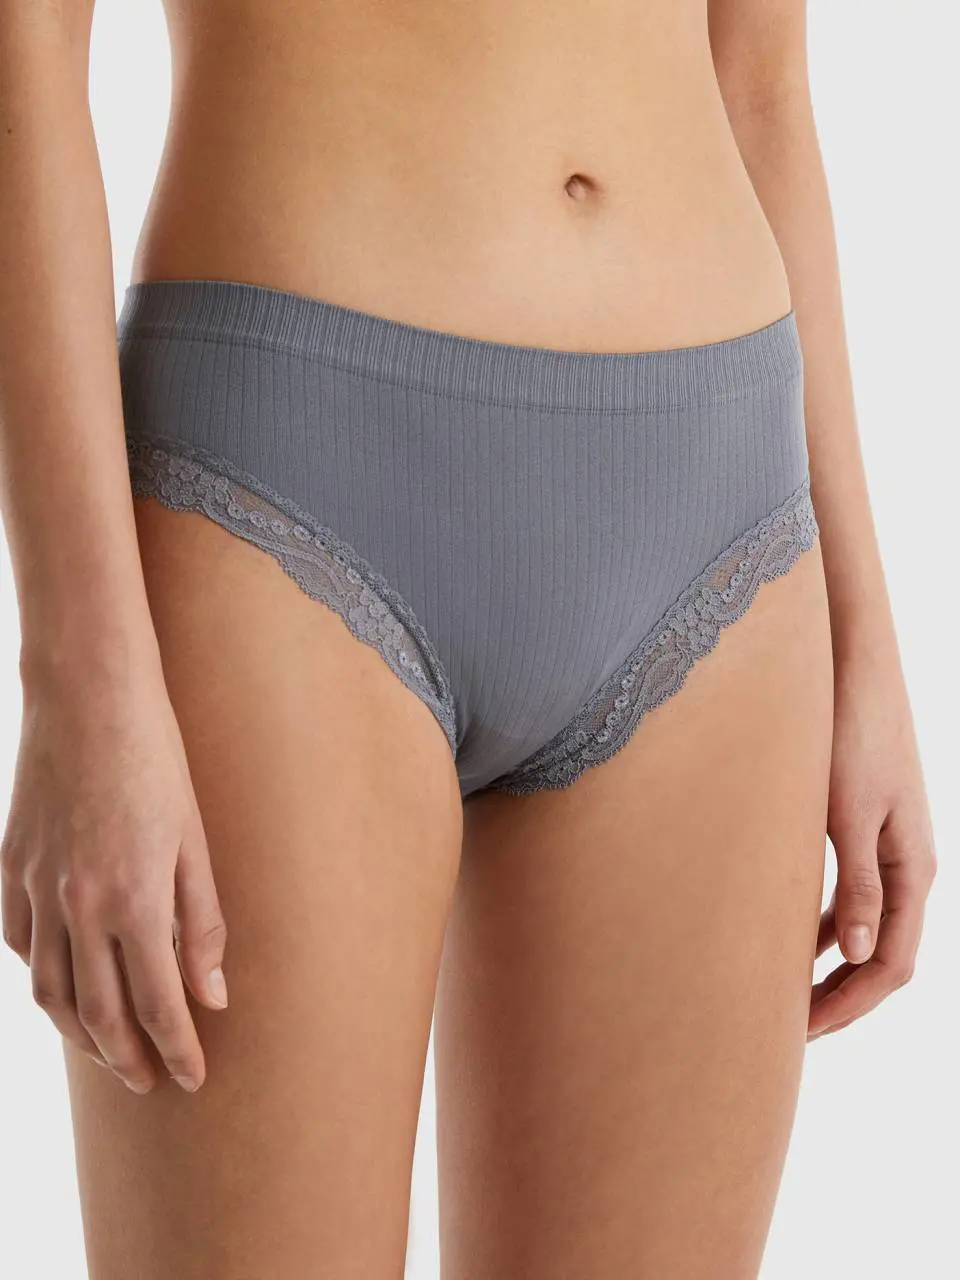 Benetton ribbed underwear with lace. 1